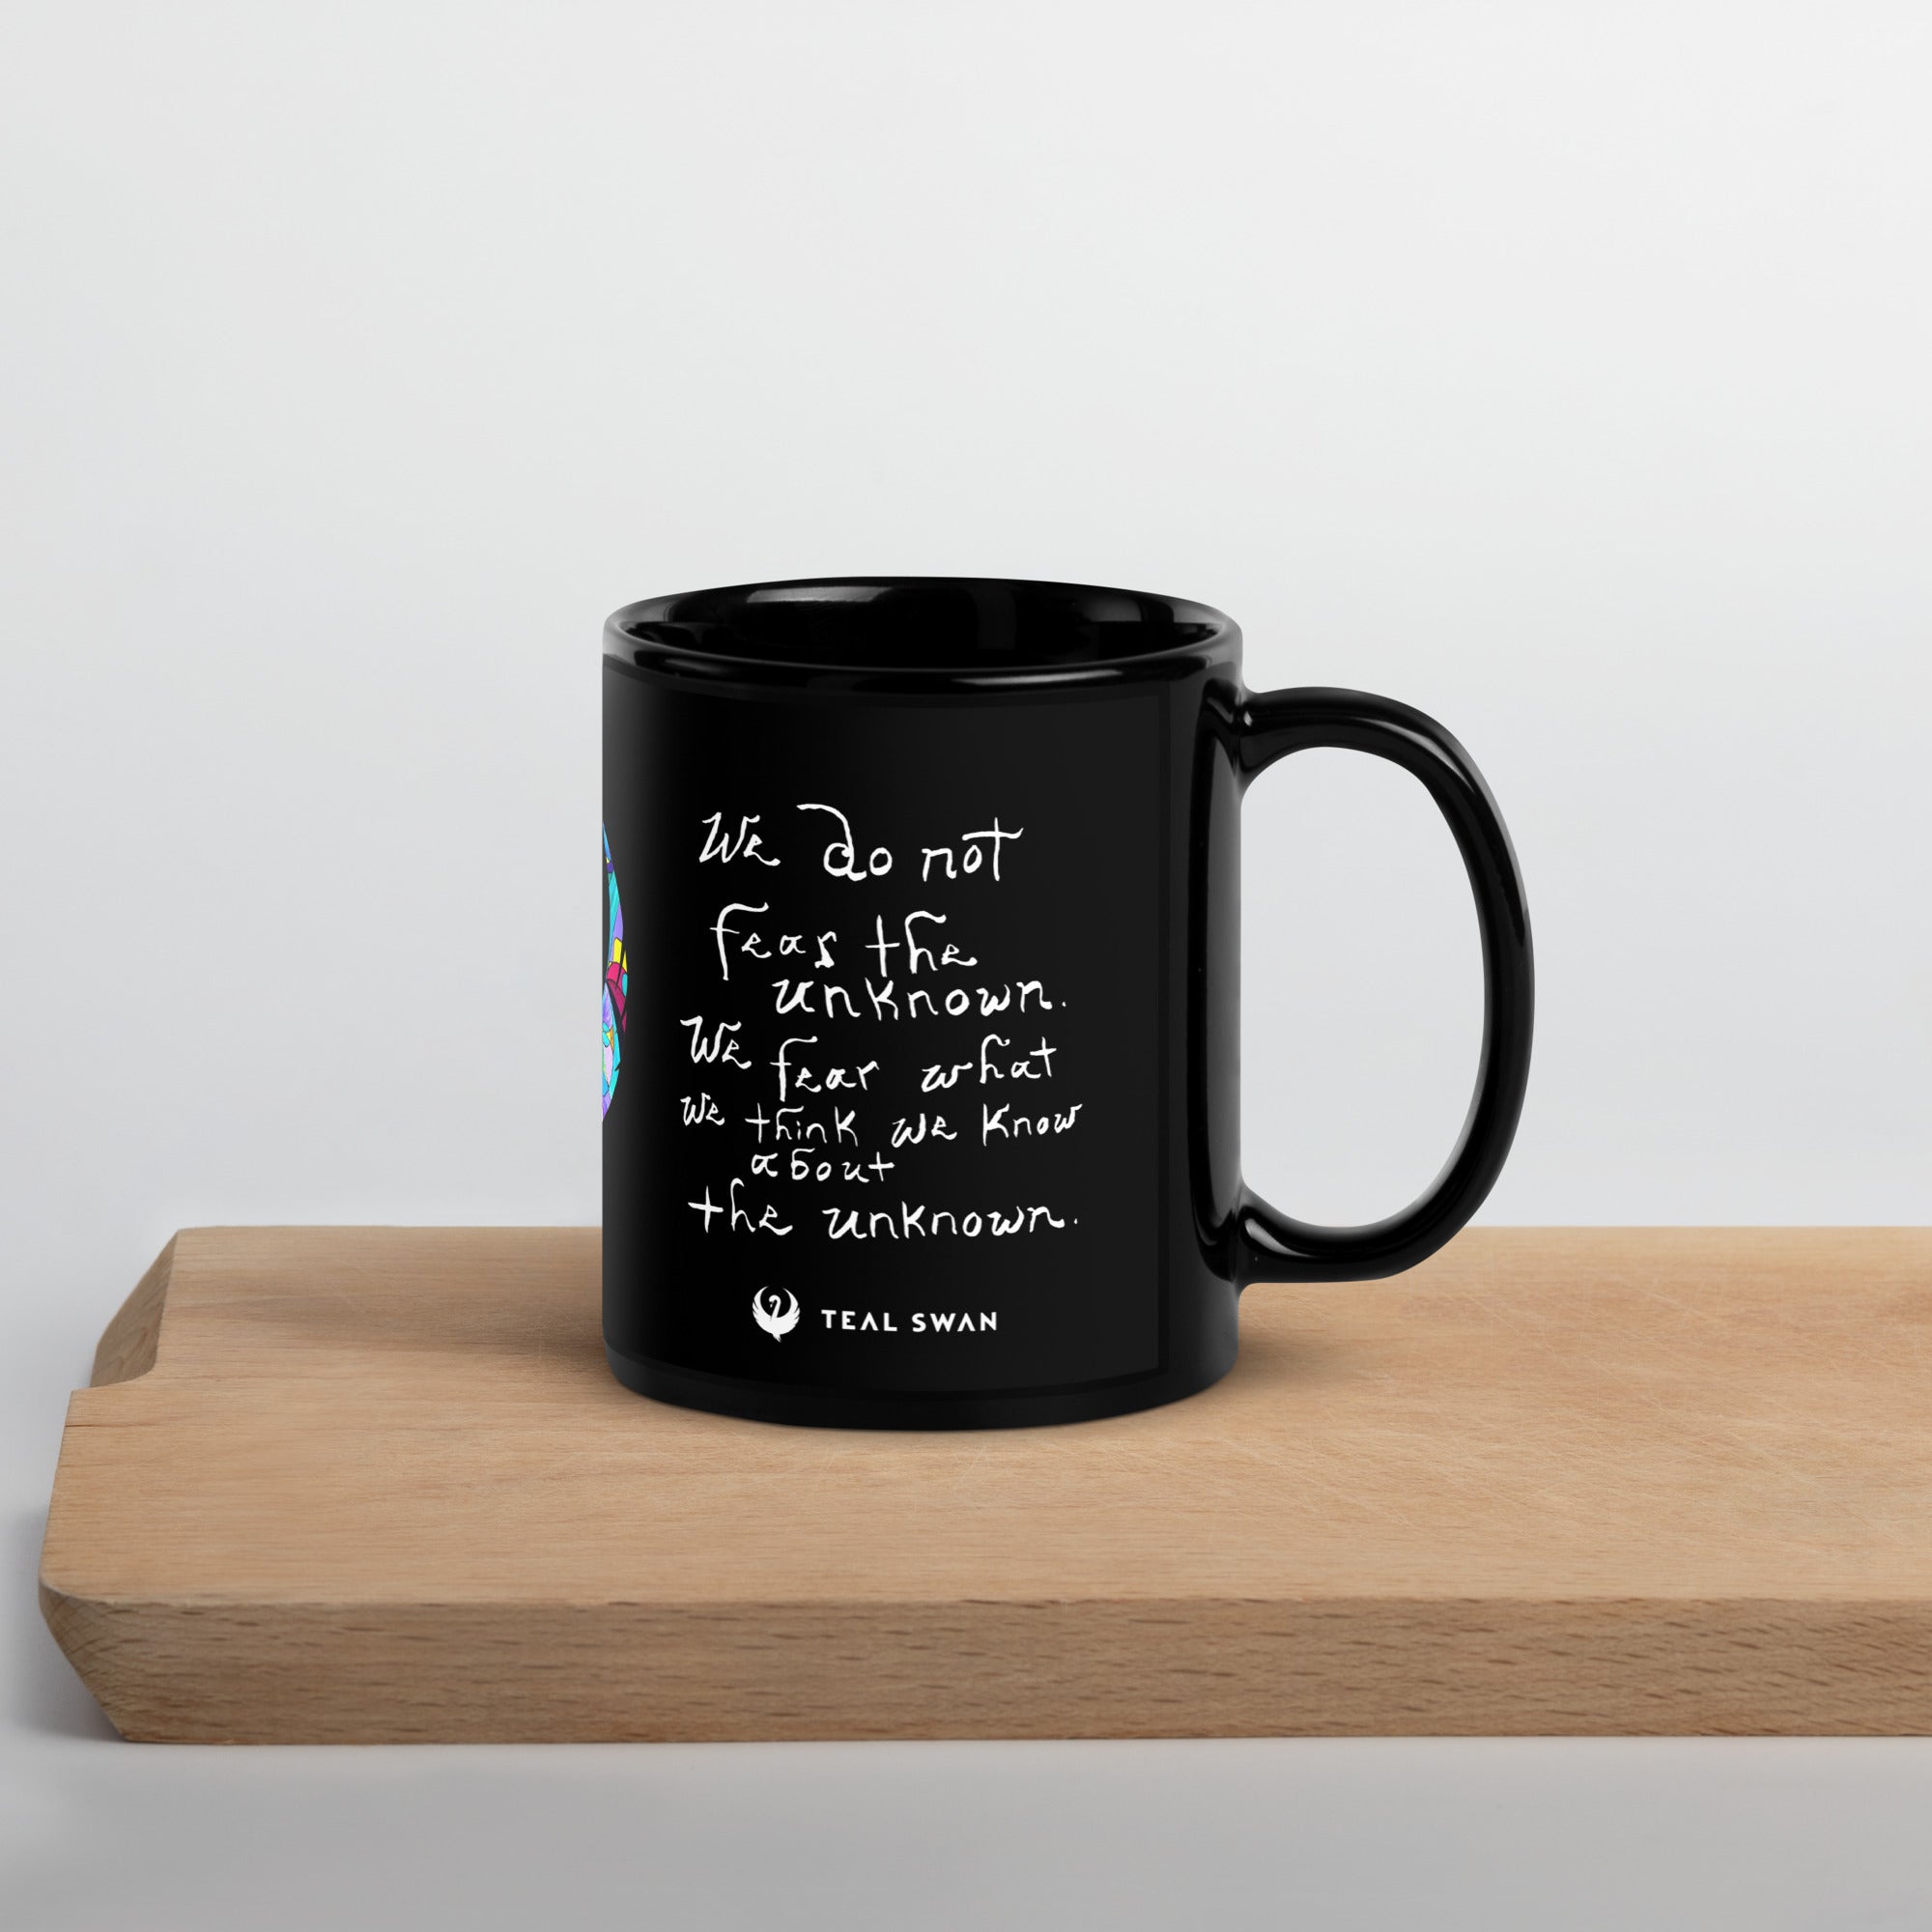 make-your-order-official-of-fear-the-unknown-quote-black-glossy-mug-fashion_0.jpg